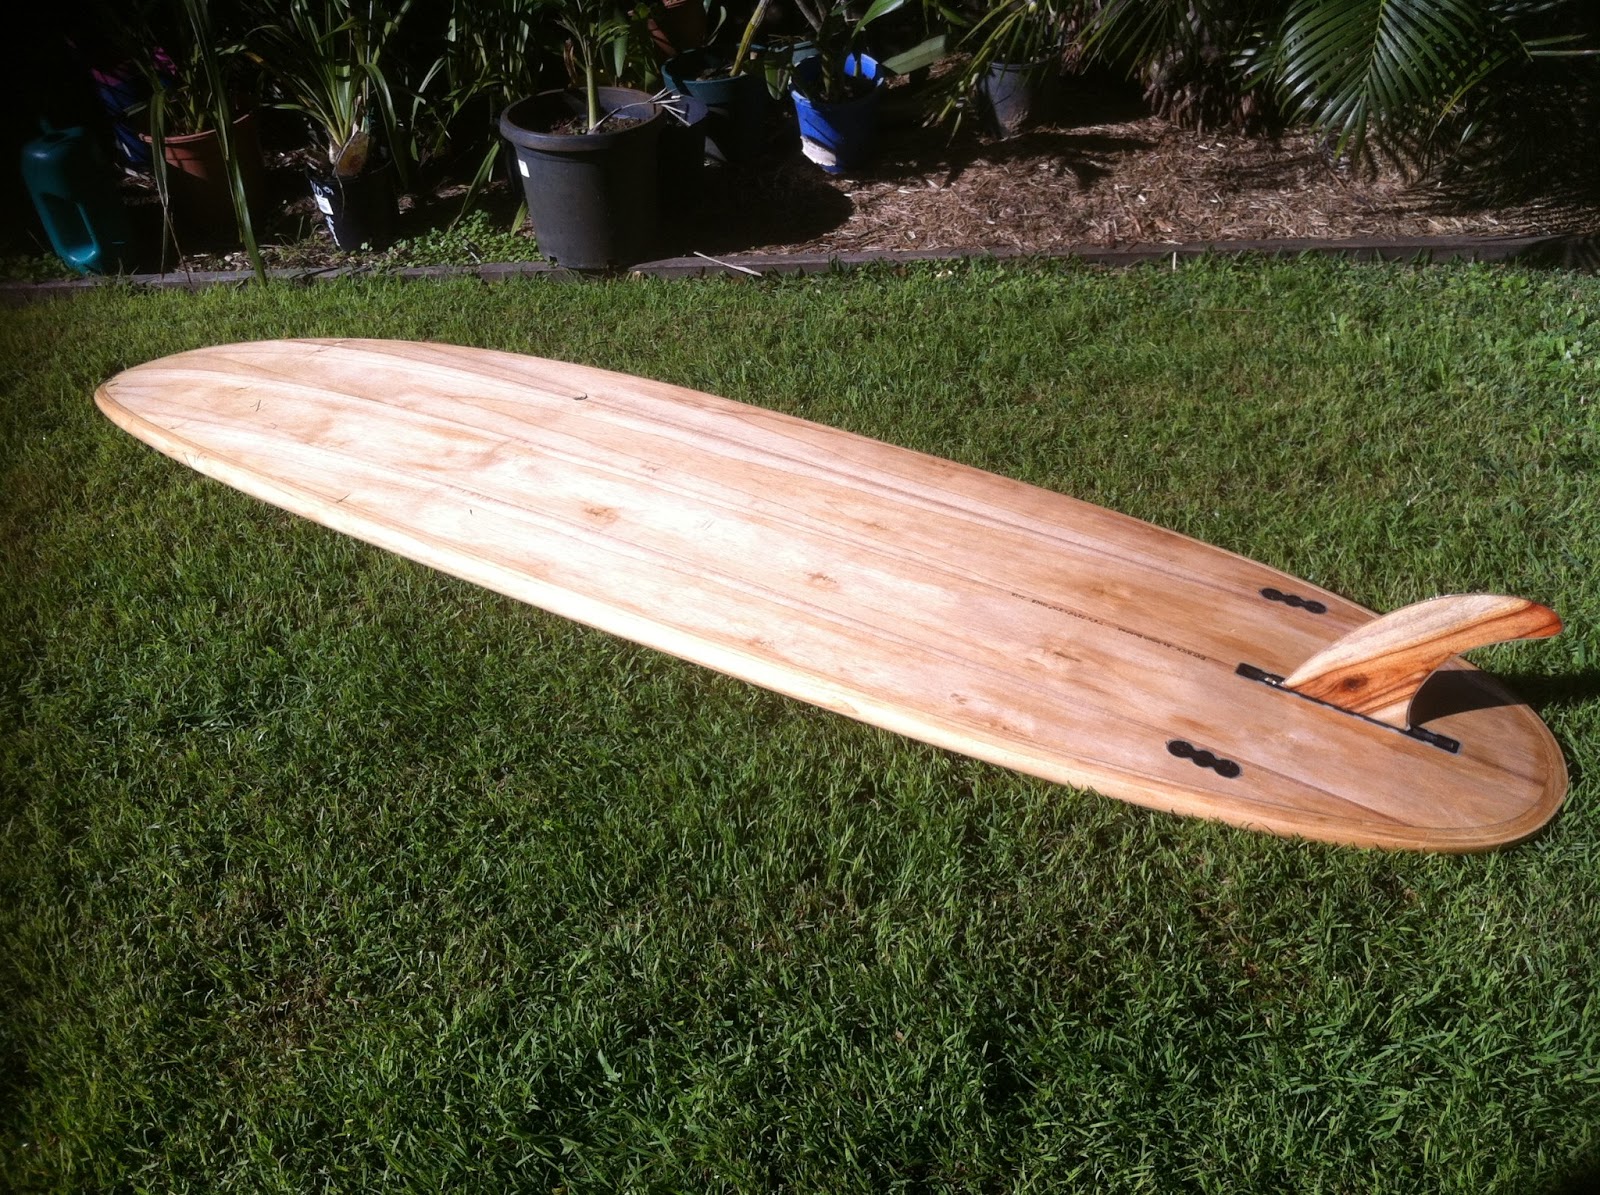 Wood Buddha - Building Wood Surfboards: Building a Hollow 